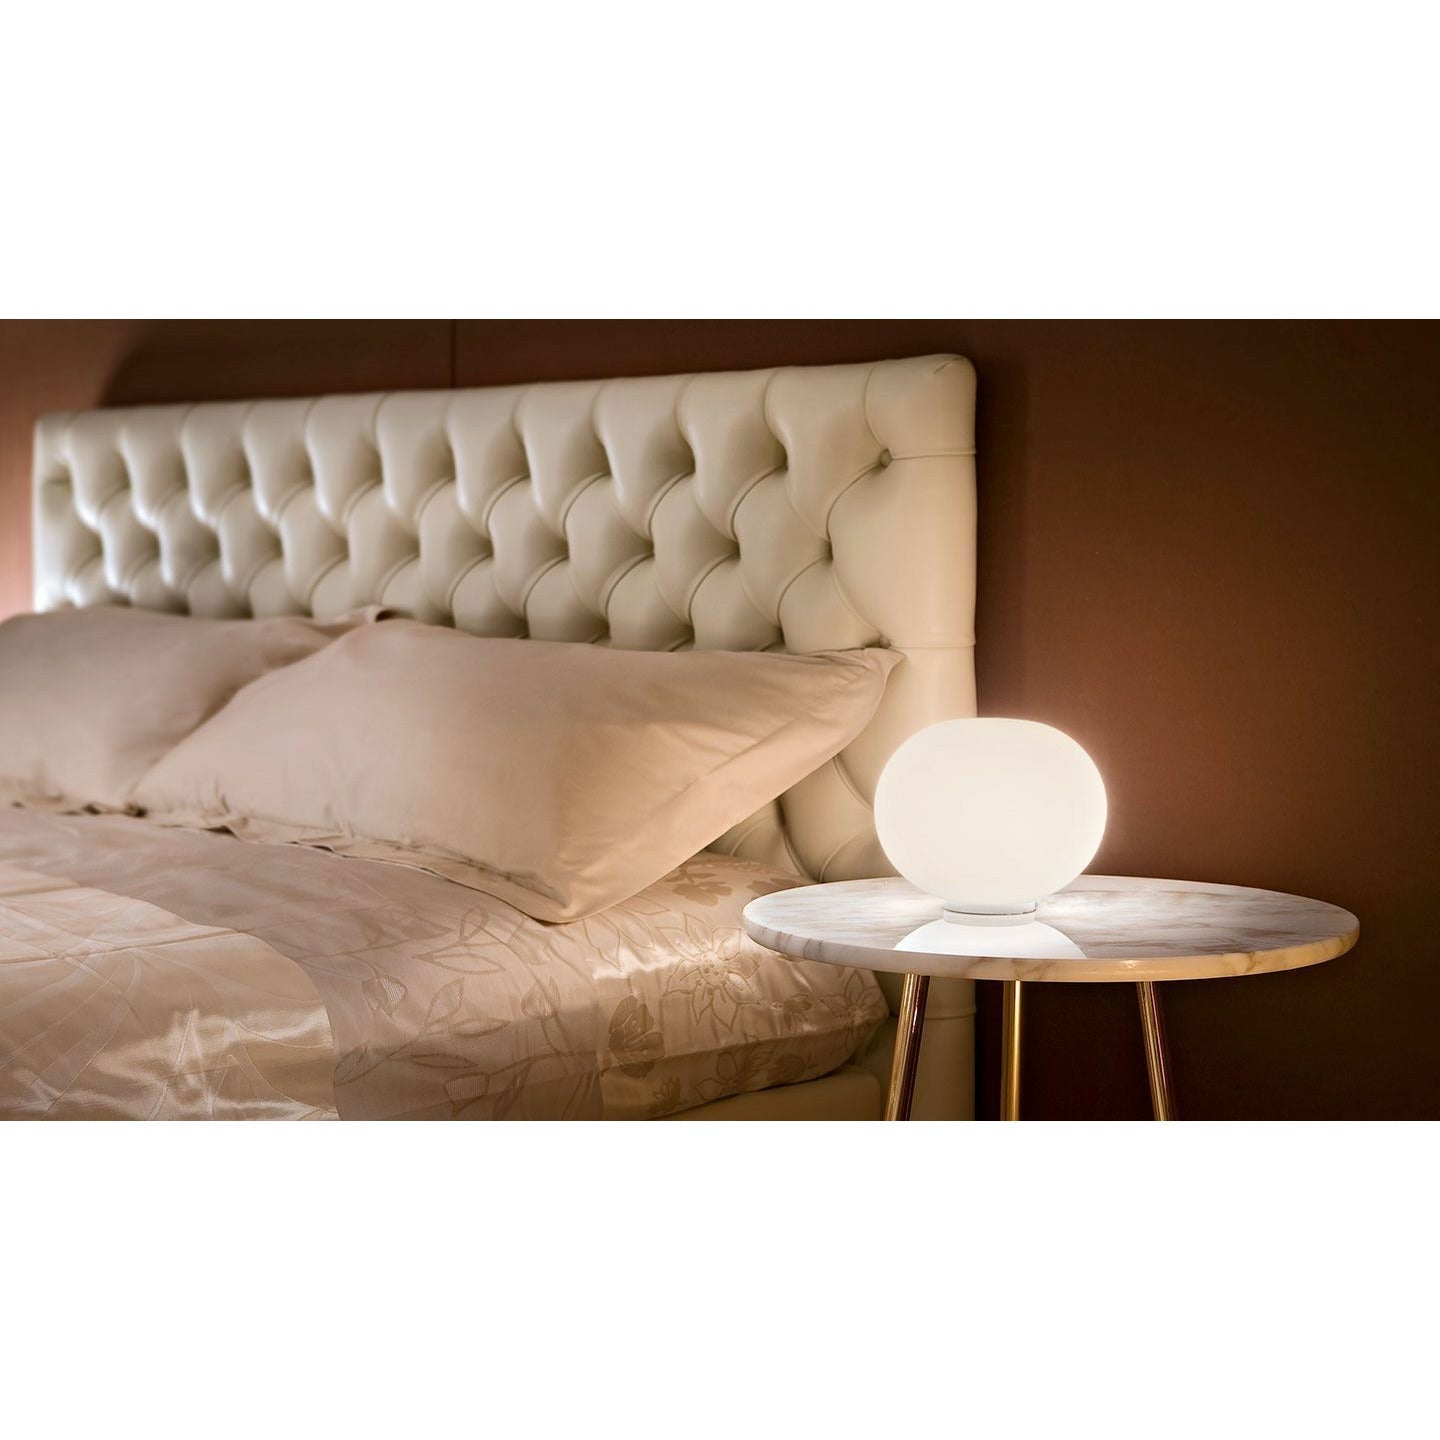 Flos Glo Ball Basic Zero Table Lamp With Dimmer